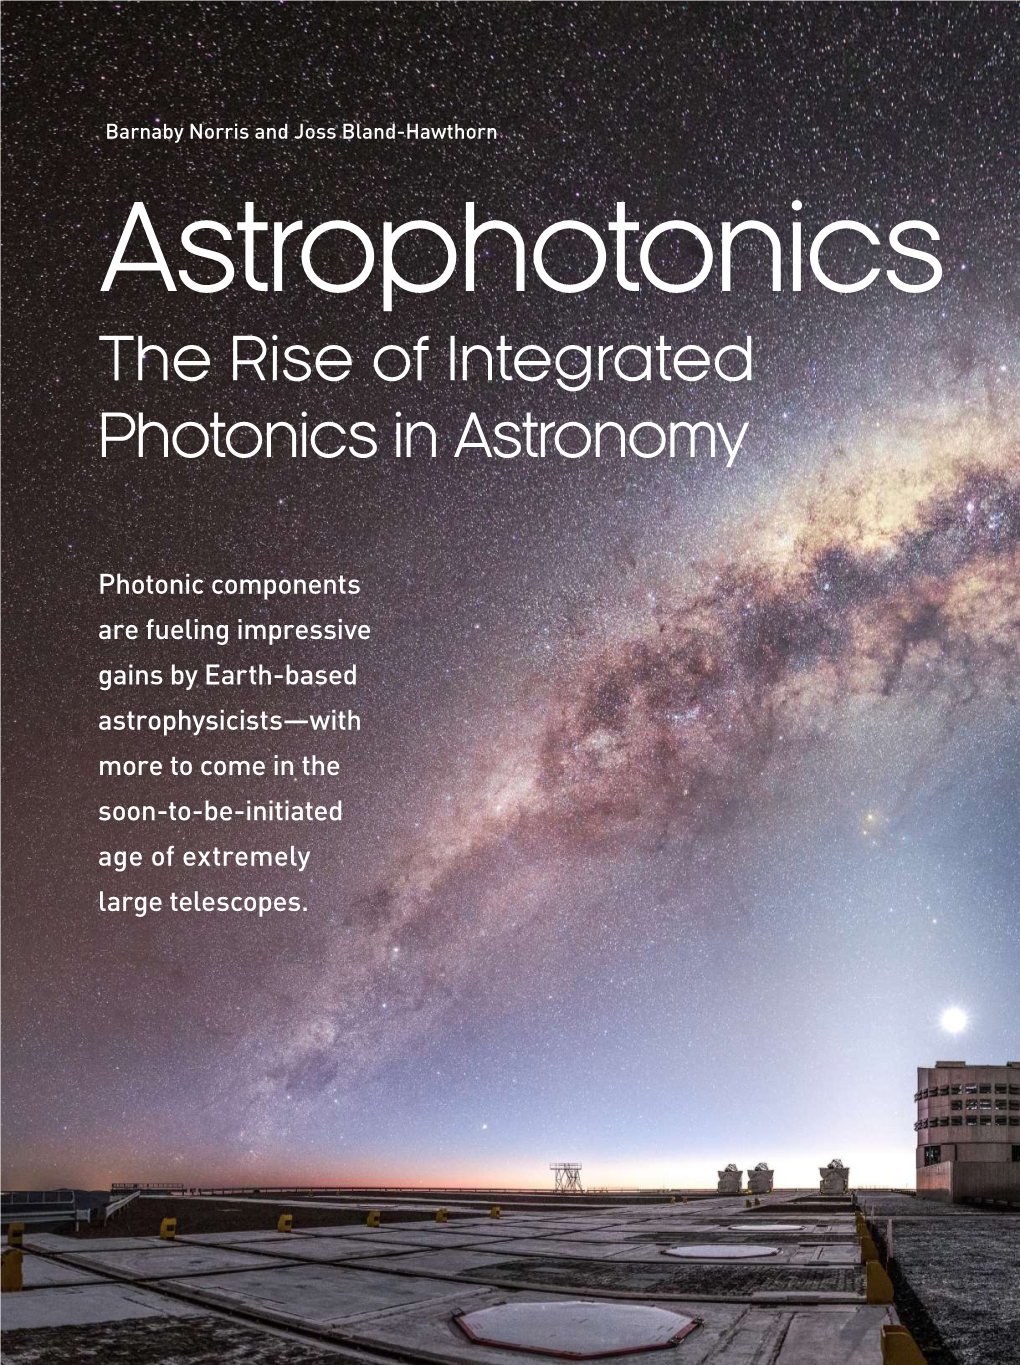 The Rise of Integrated Photonics in Astronomy